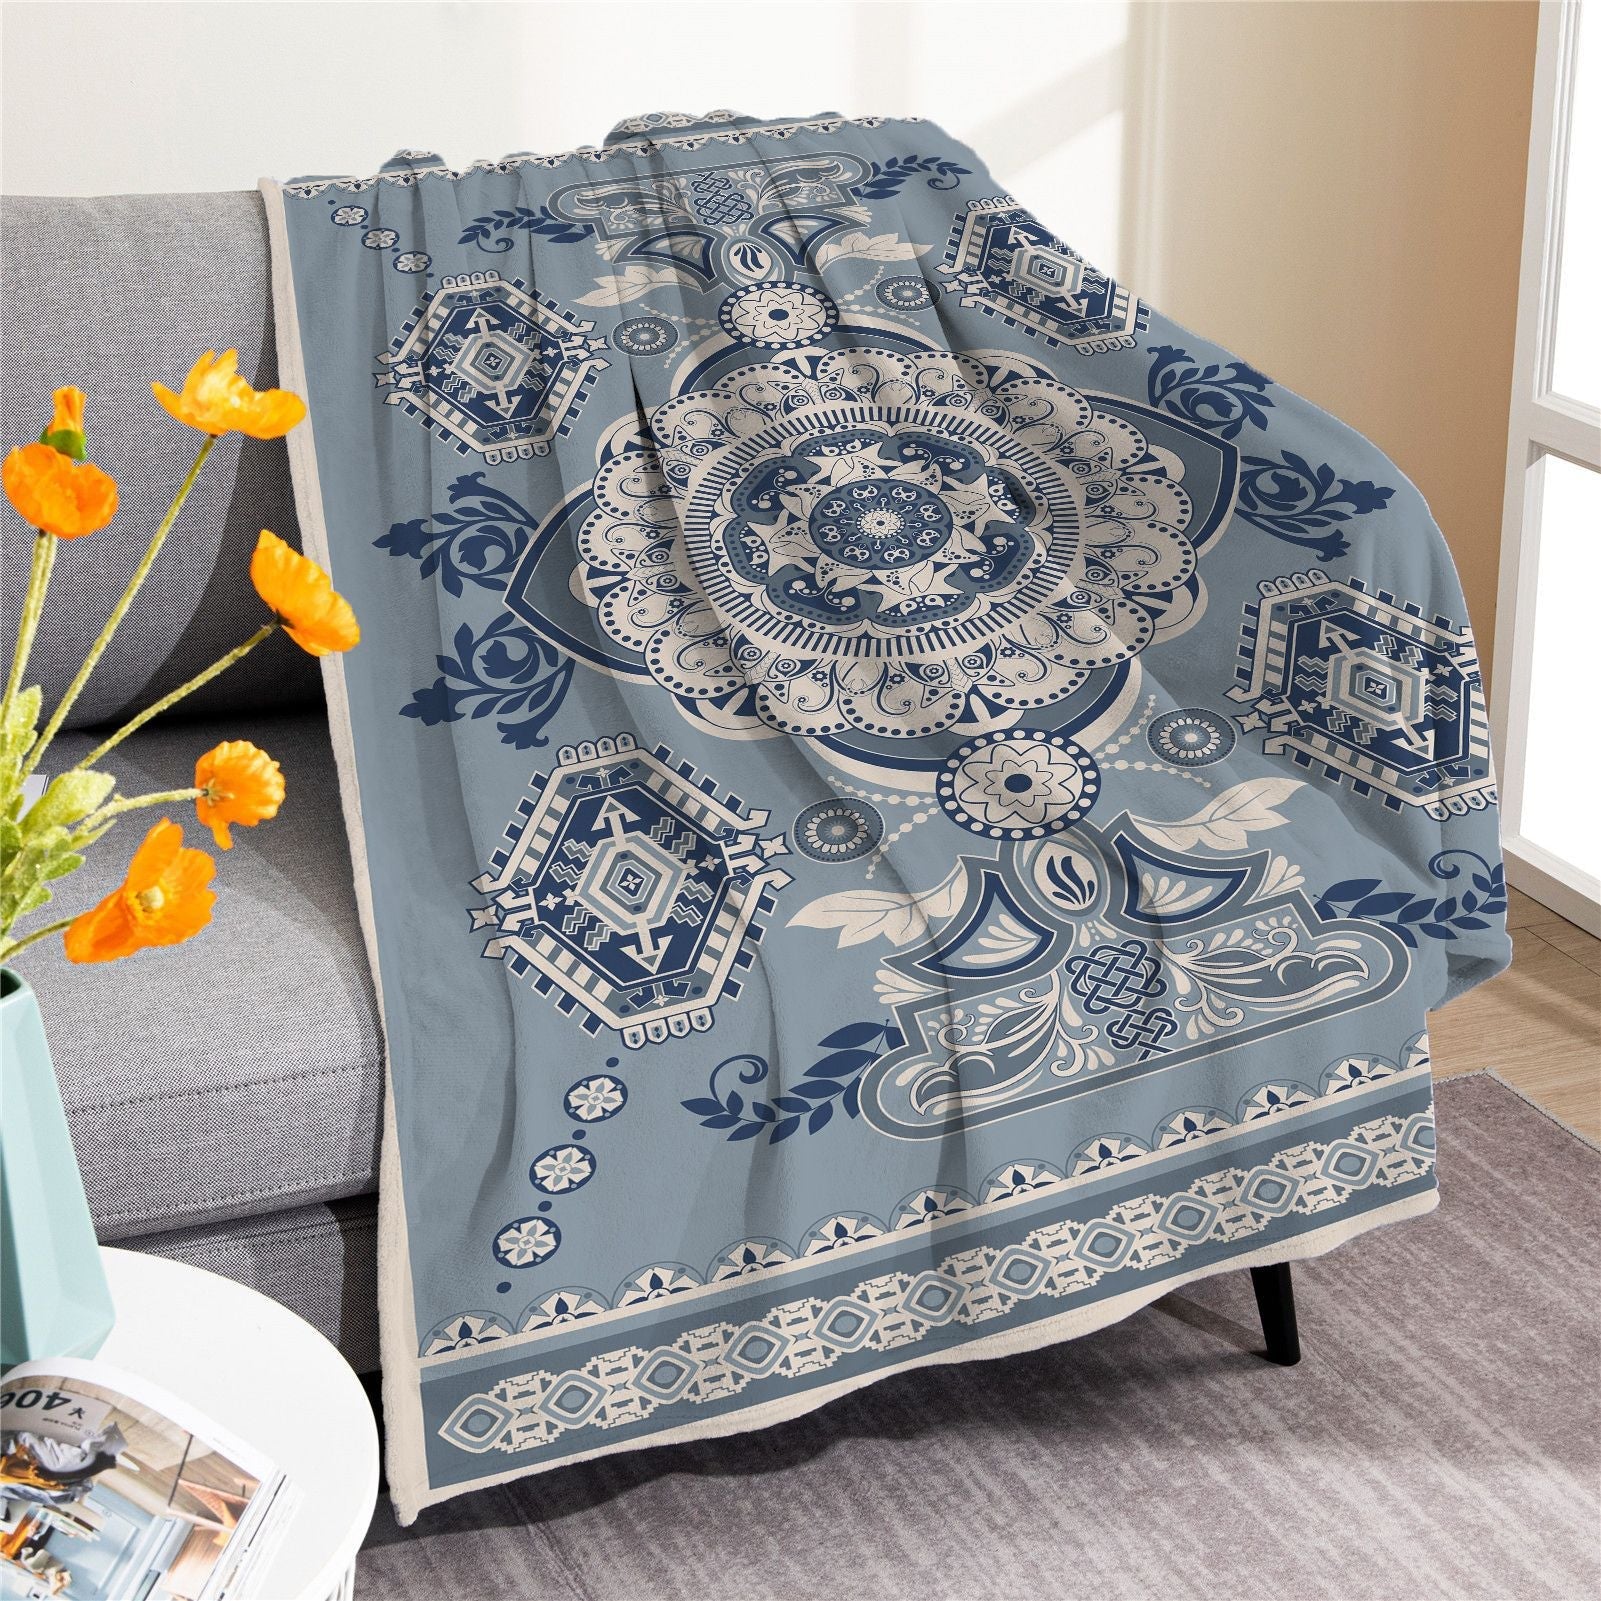 Vintage Boho Fleece Throw Blankets-Blankets-M20220701-20-50*60 Inches-Free Shipping at meselling99